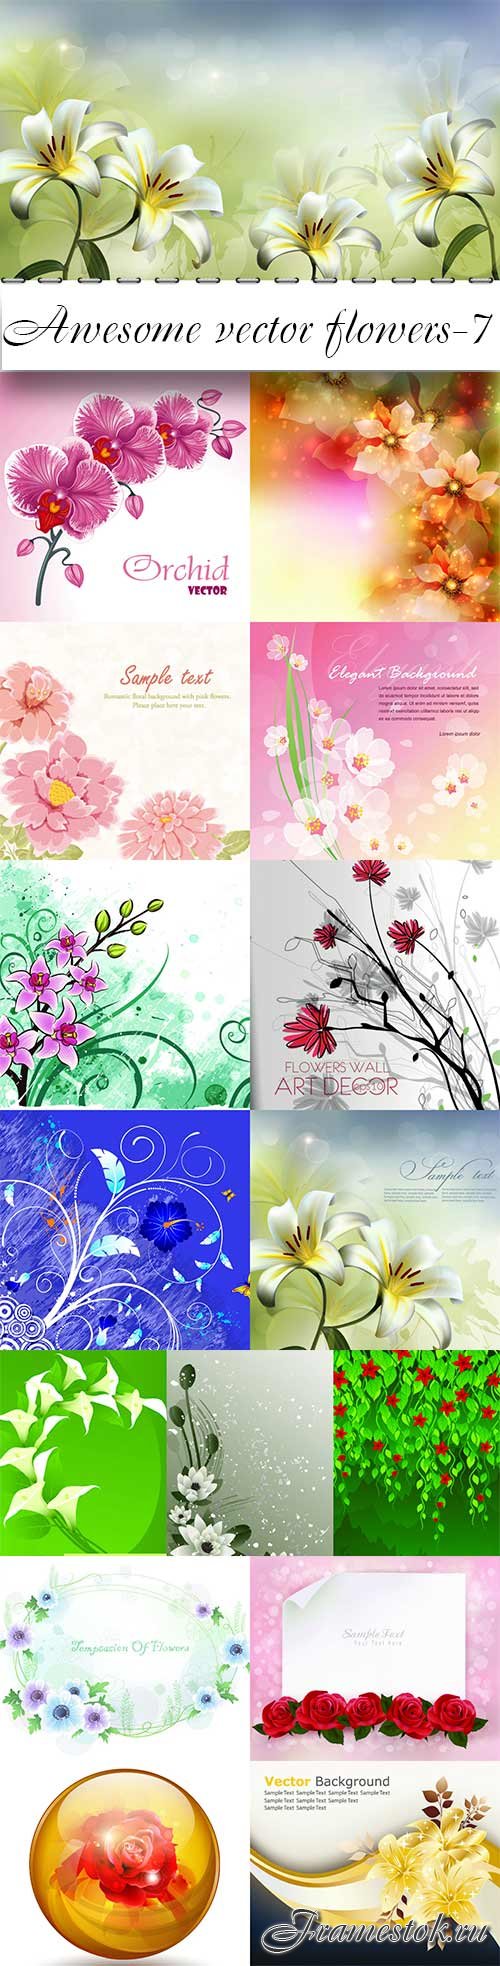 Awesome vector flowers-7